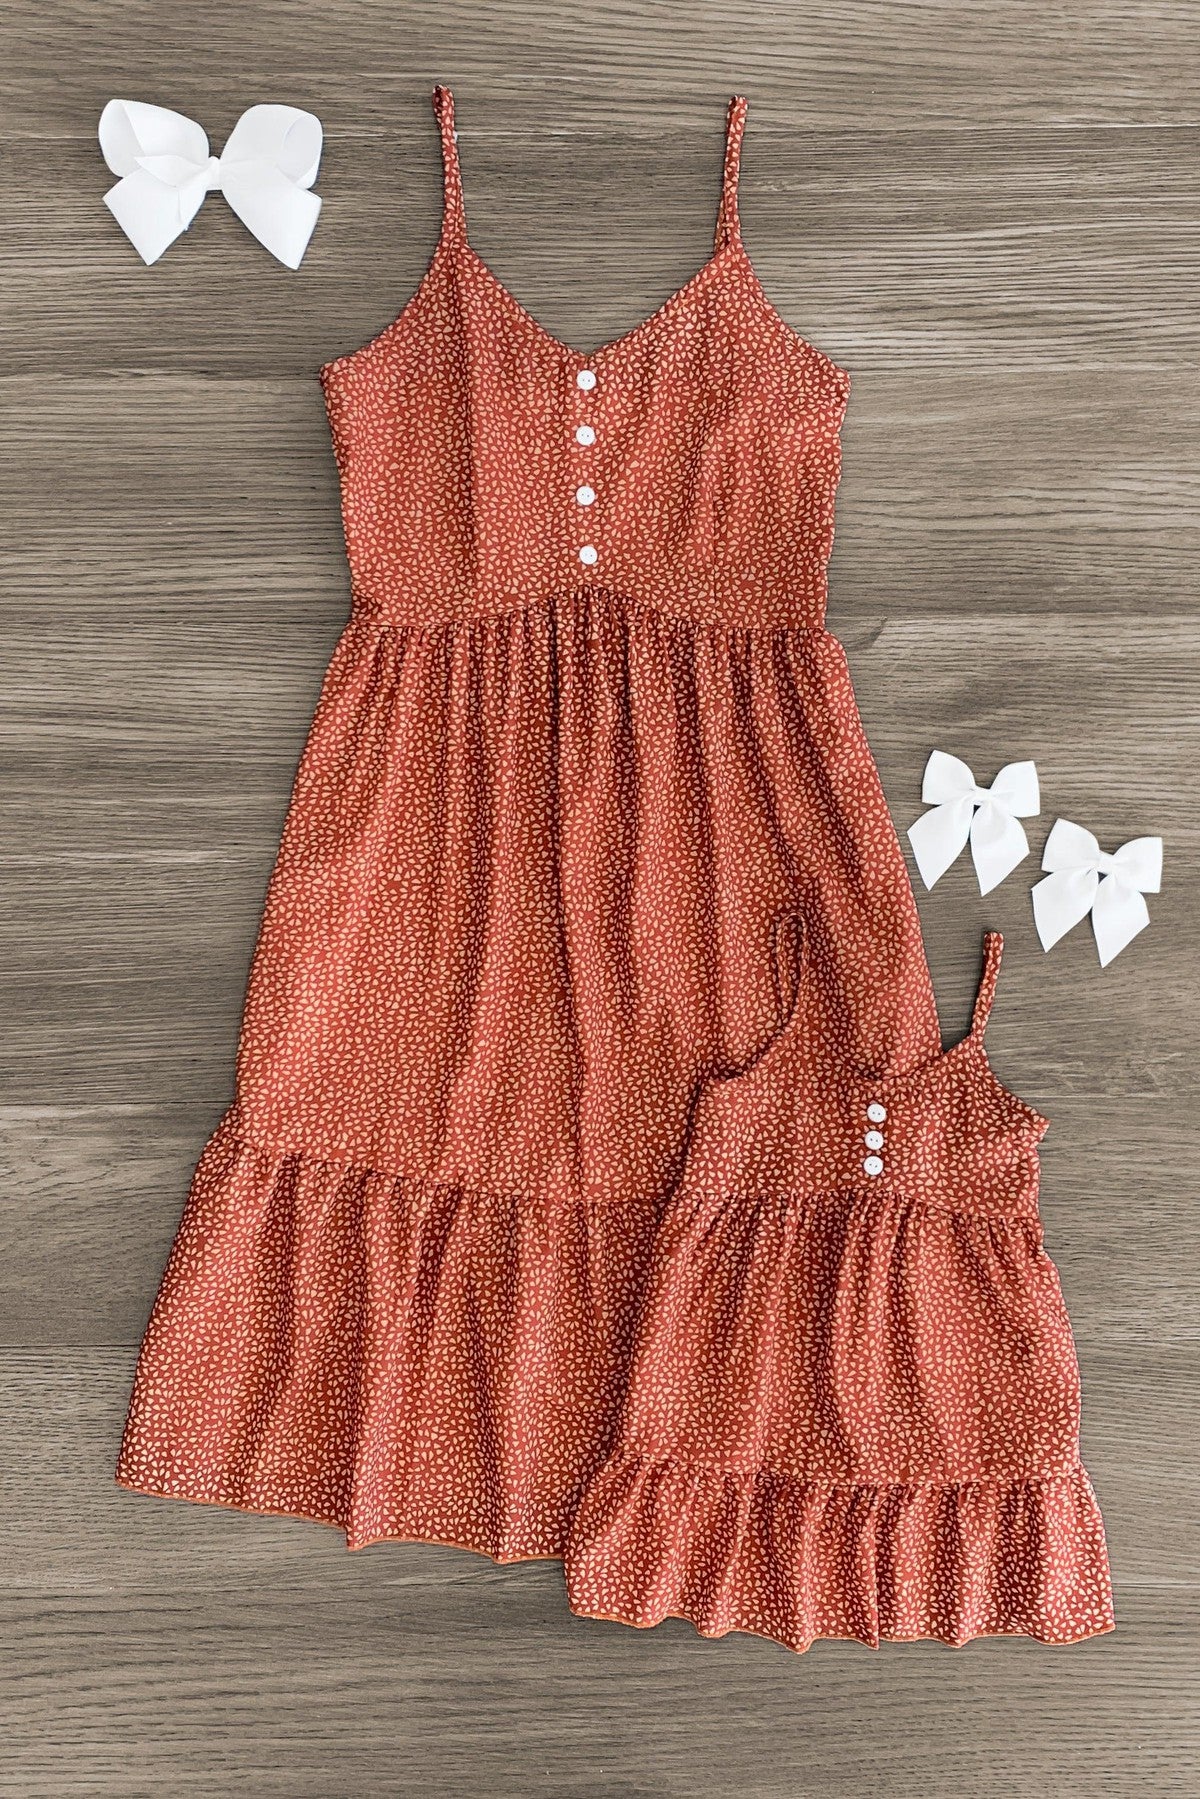 Mom & Me - Brown Sleeveless Dress - Sparkle in Pink